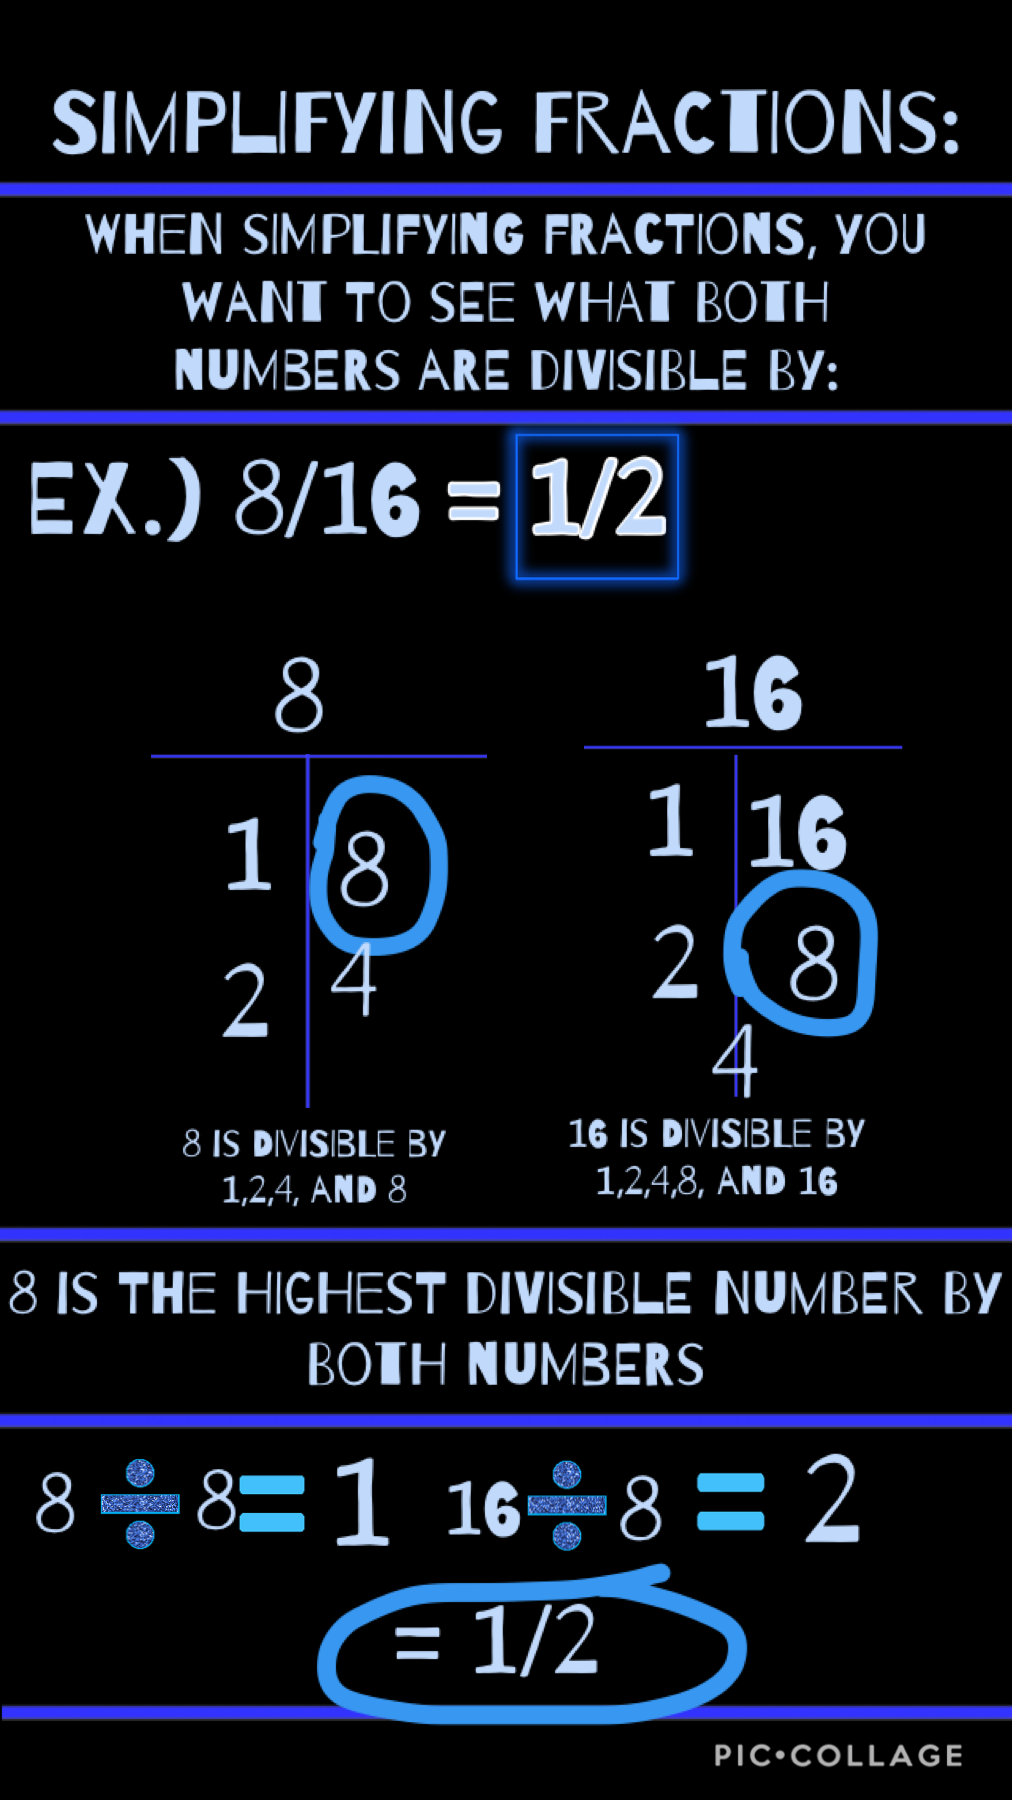 Here’s a lesson on simplifying fractions! If the both numbers biggest divisible number is 1, you can’t simply it (it’s all the way simplified).  Later today I’ll do an example with bigger numbers, so you get the idea of how to do all numbers!  Thx guys, l